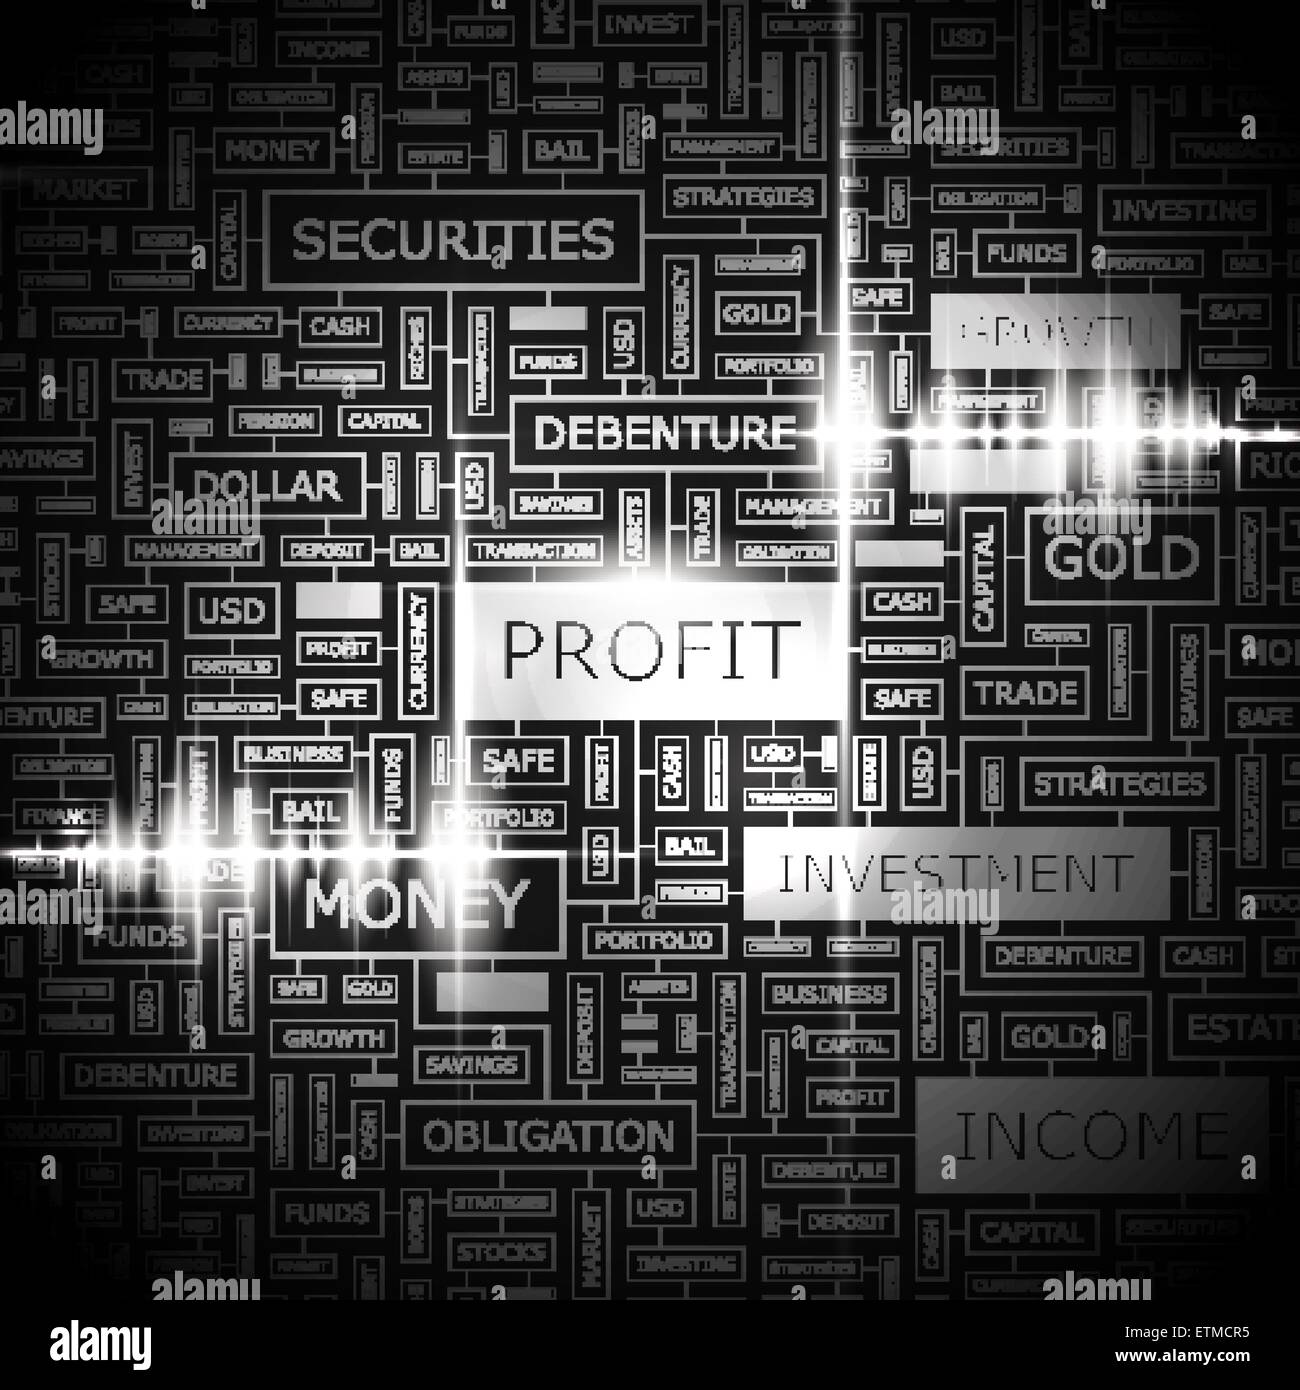 PROFIT. Concept illustration. Graphic tag collection. Wordcloud collage. Stock Vector